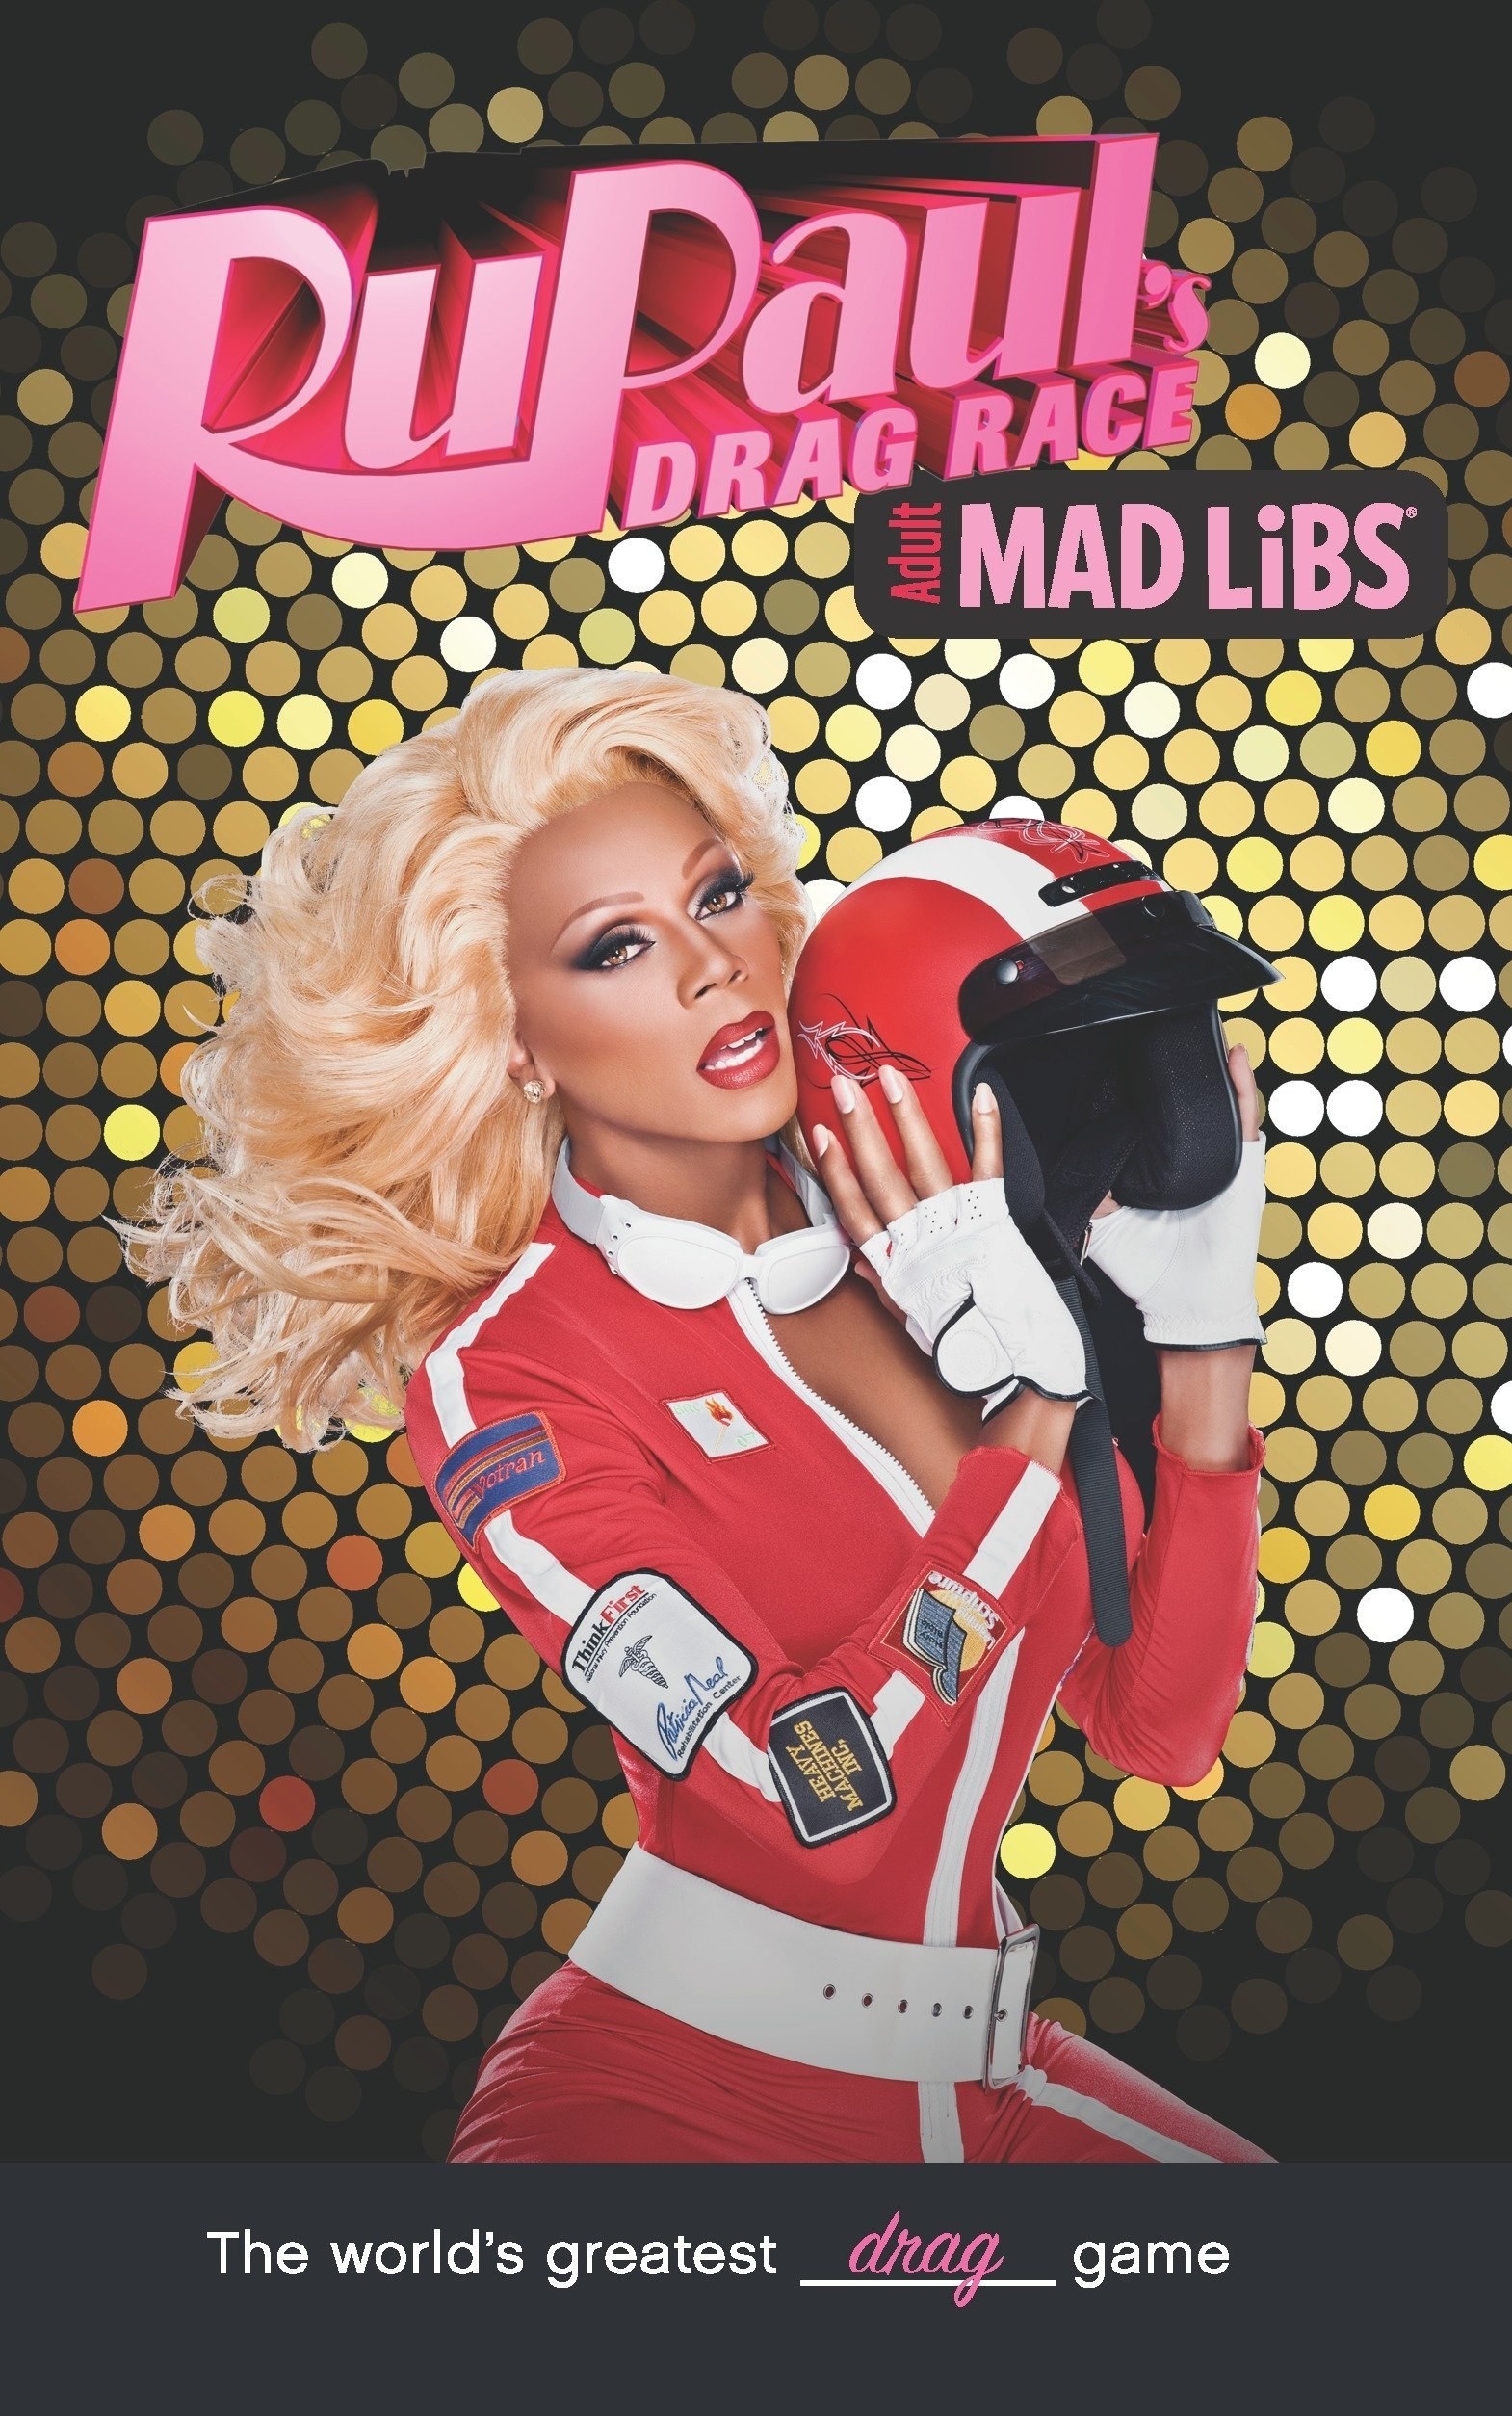 the cover of the book with Rupaul on it